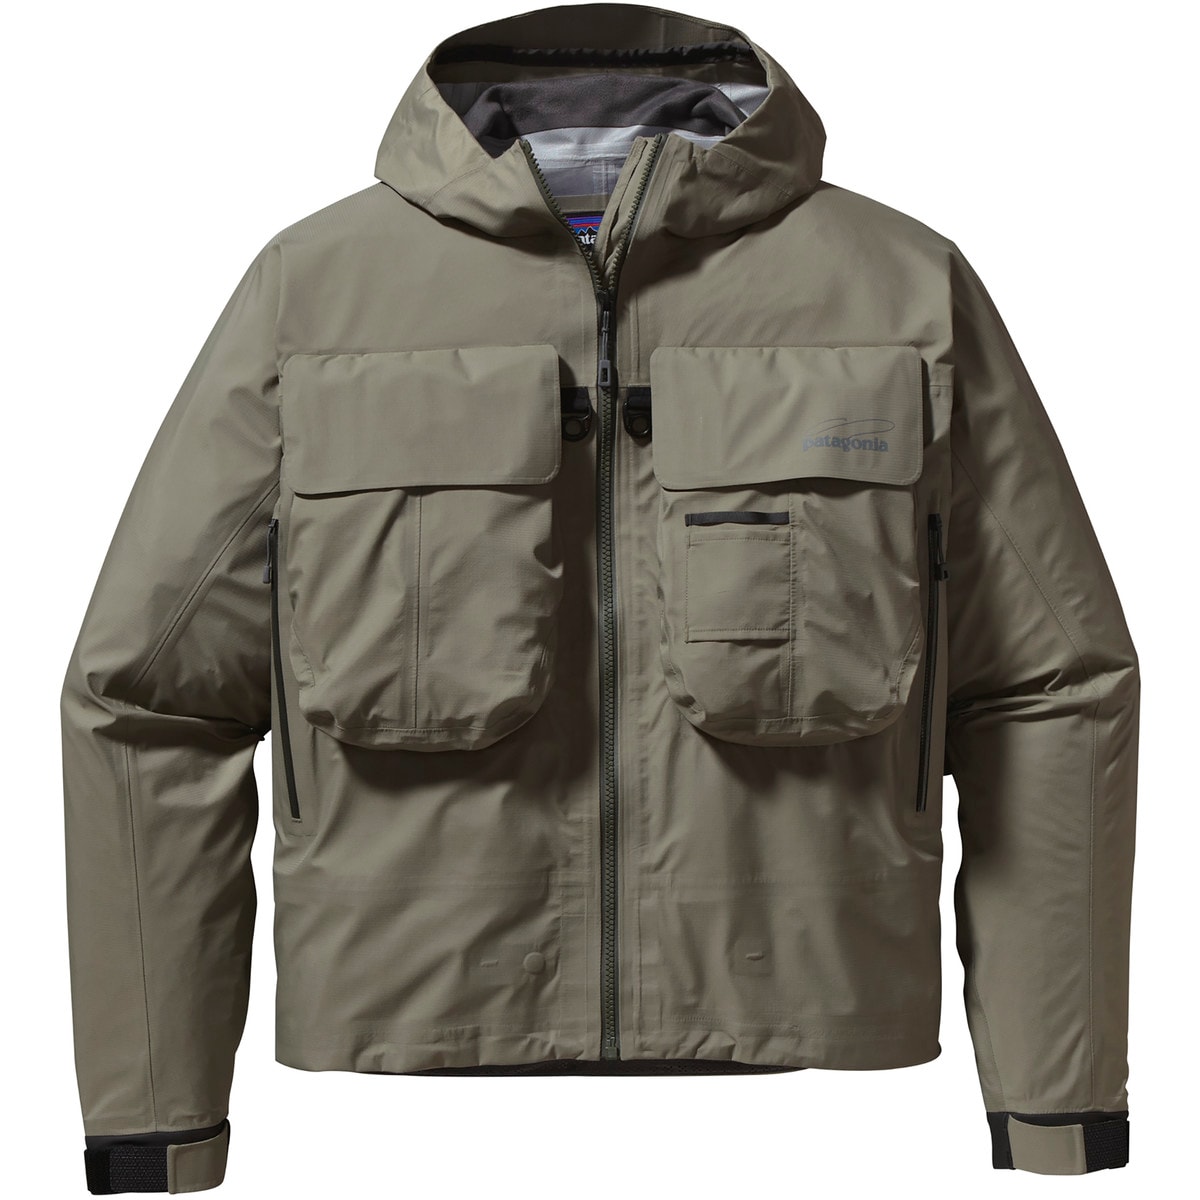 Patagonia Fishing Jackets, Waders, Boots & Accessories